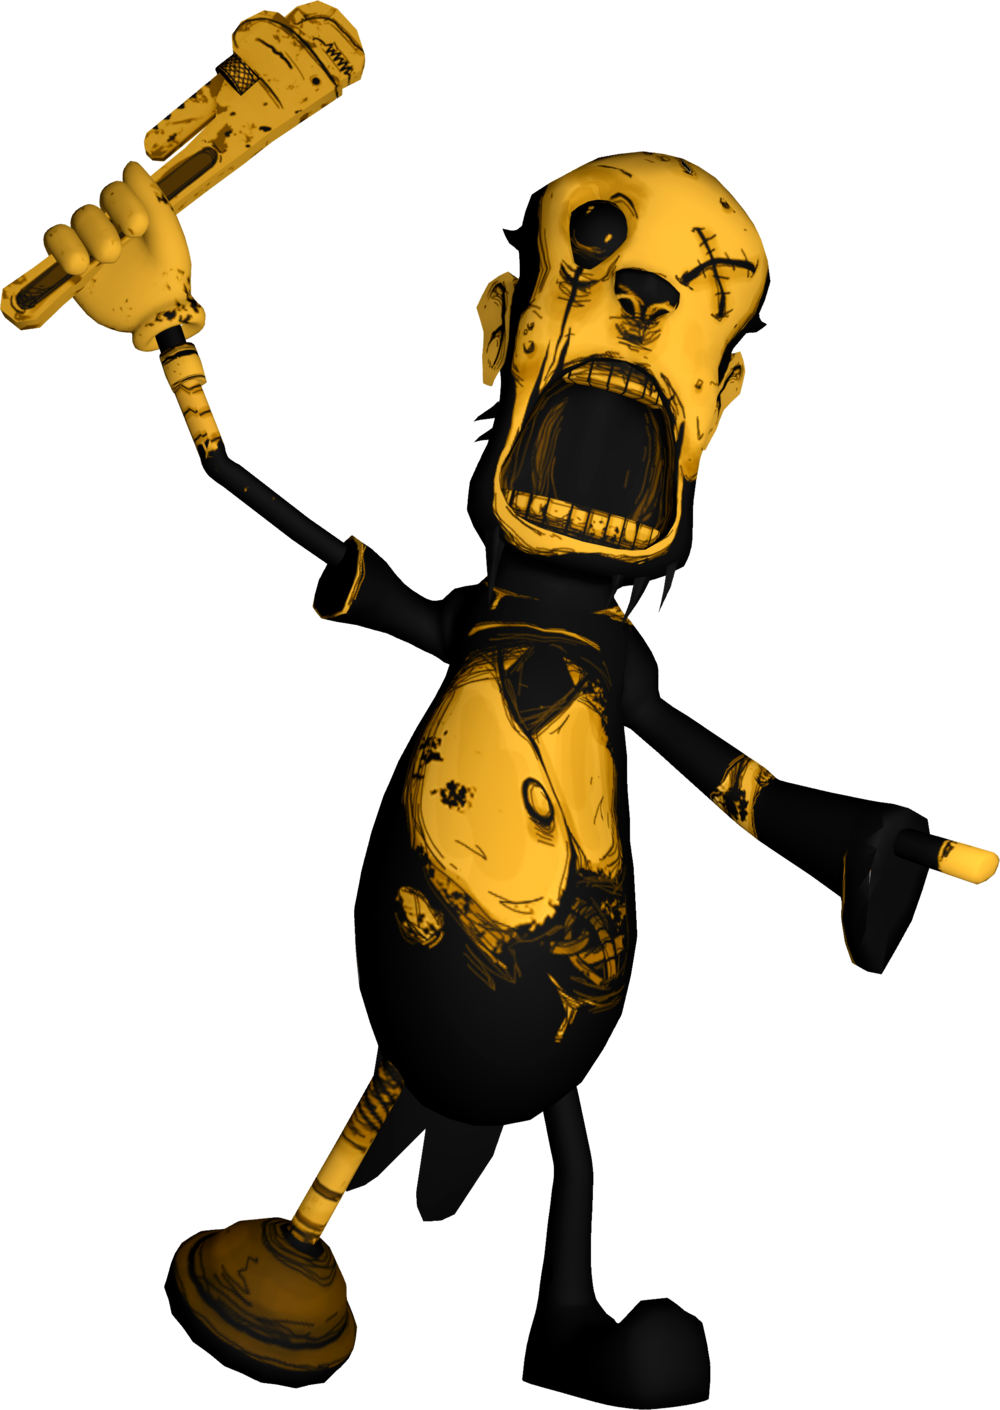 Our Cruel World - A Bendy and the Ink Machine Song